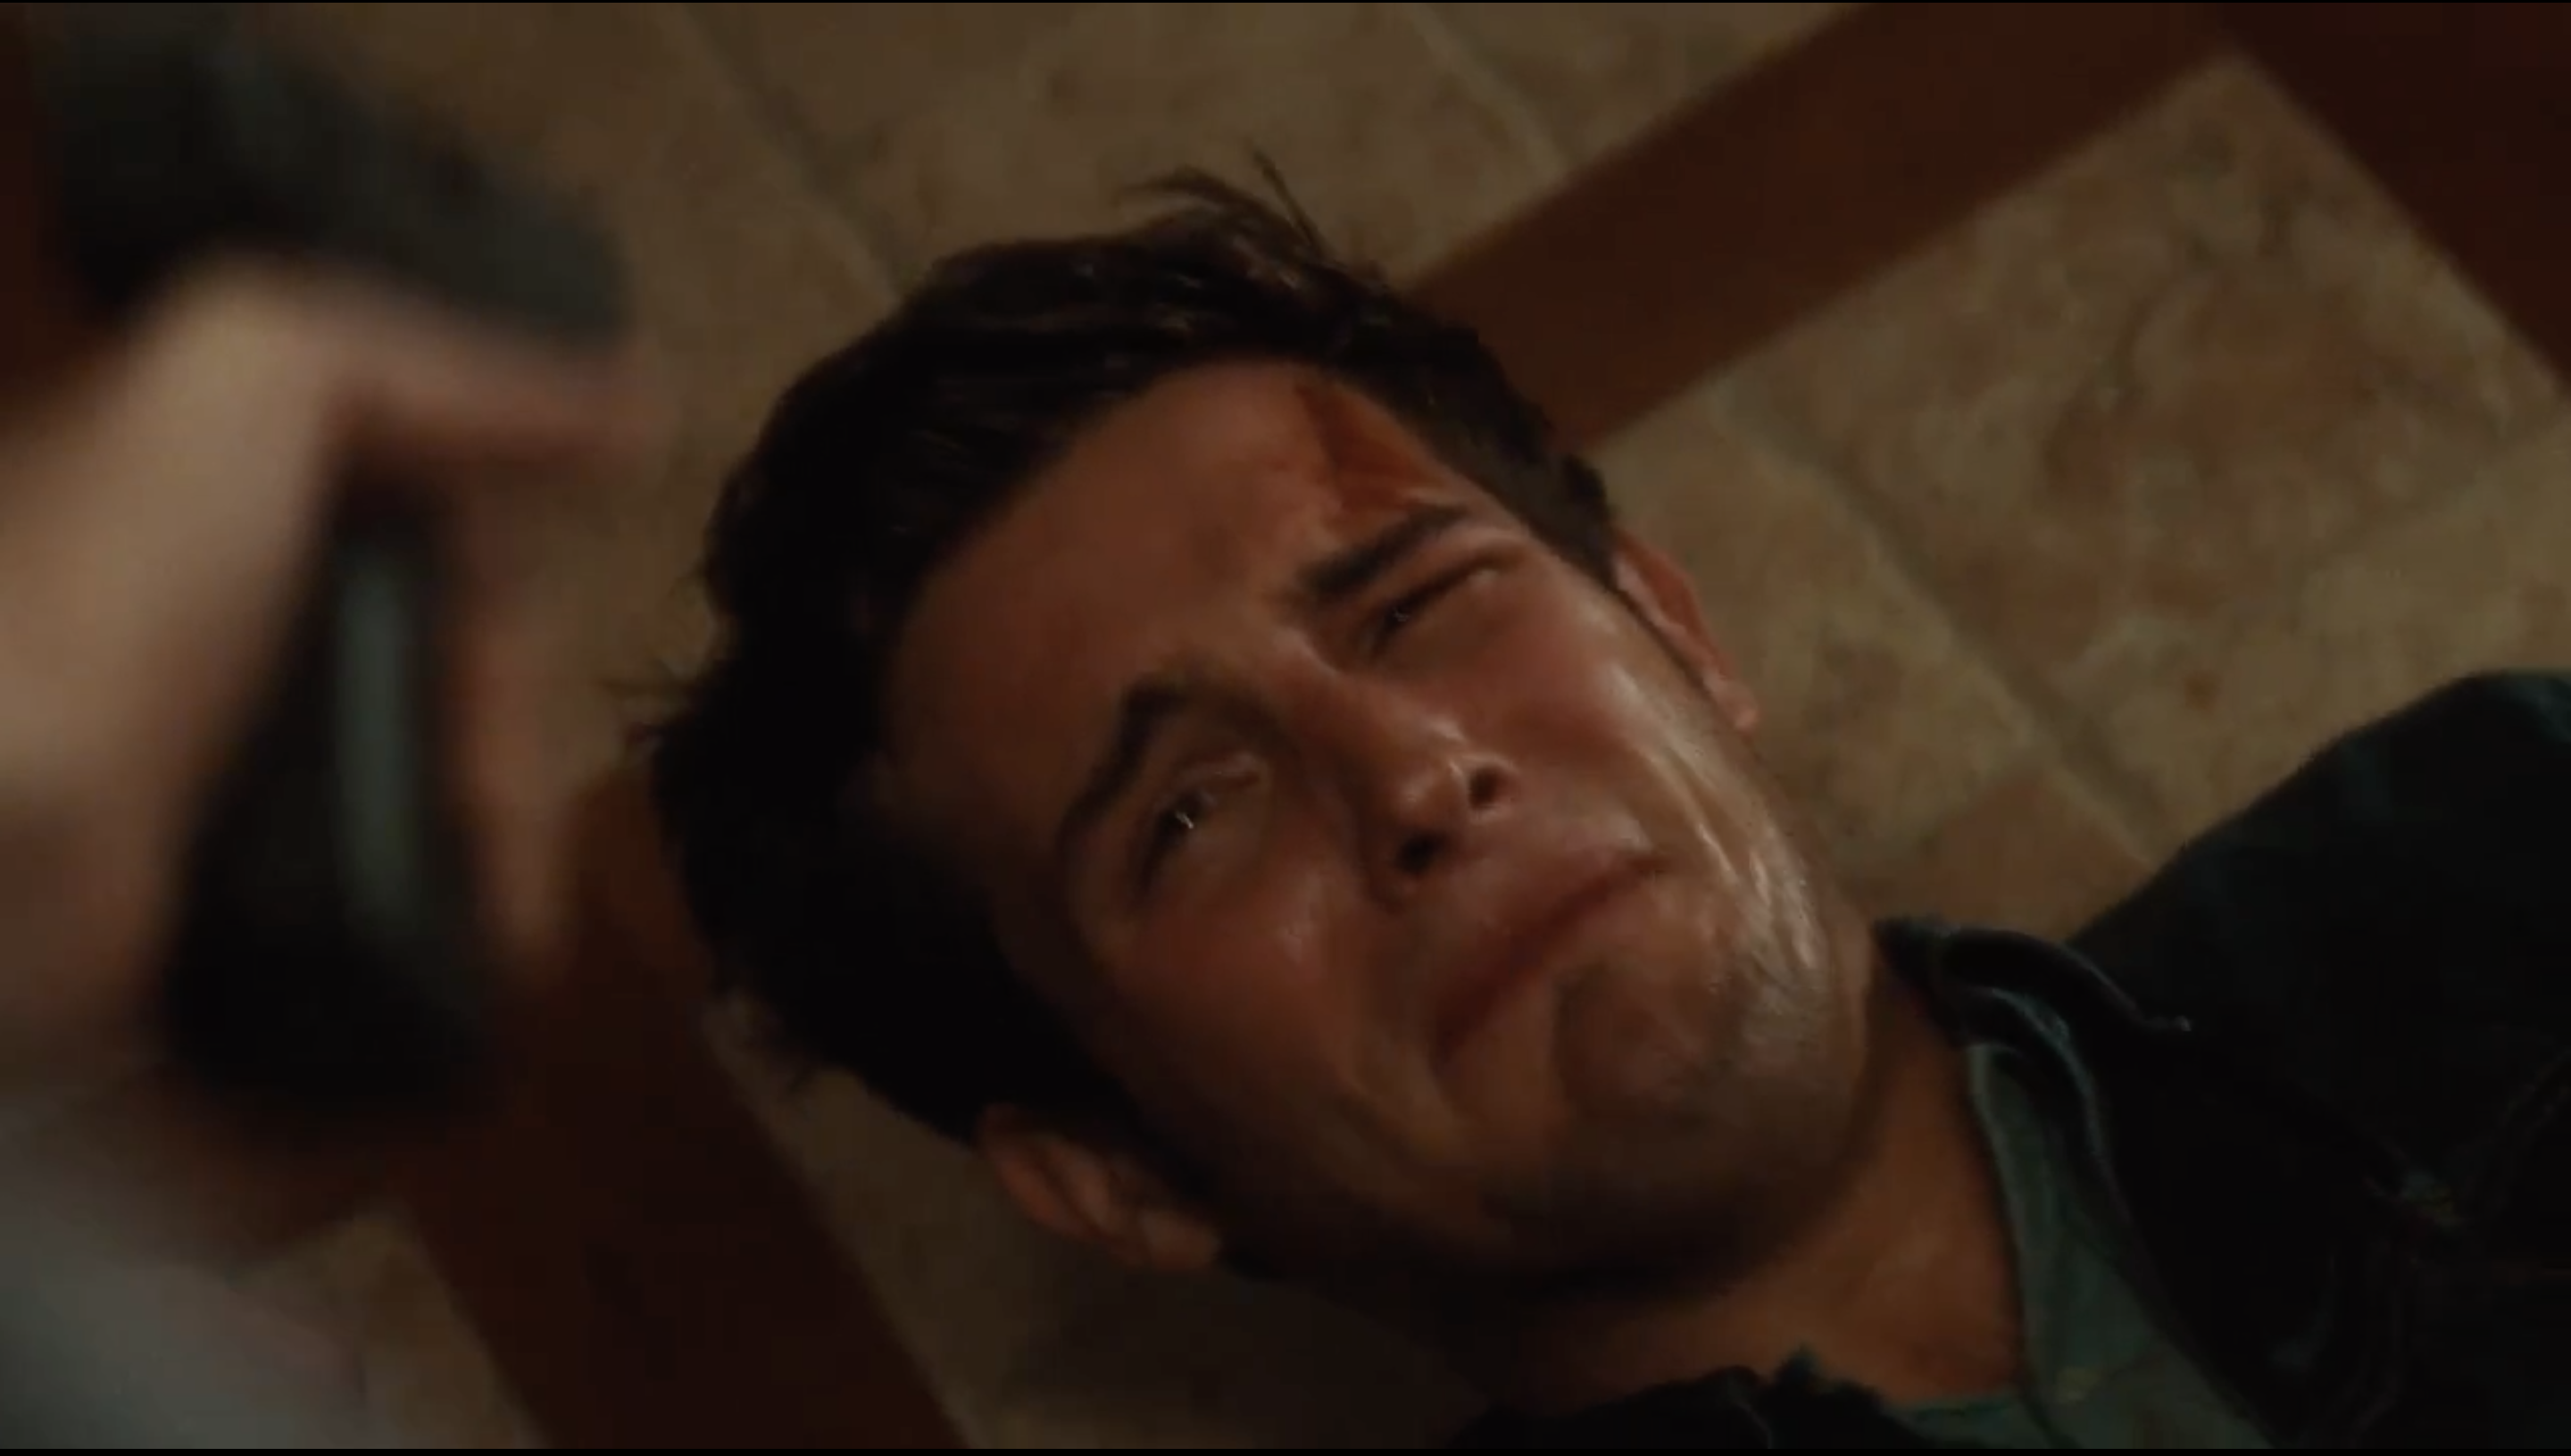 Nico Tortorella lies on the floor with a gun pointed at his head